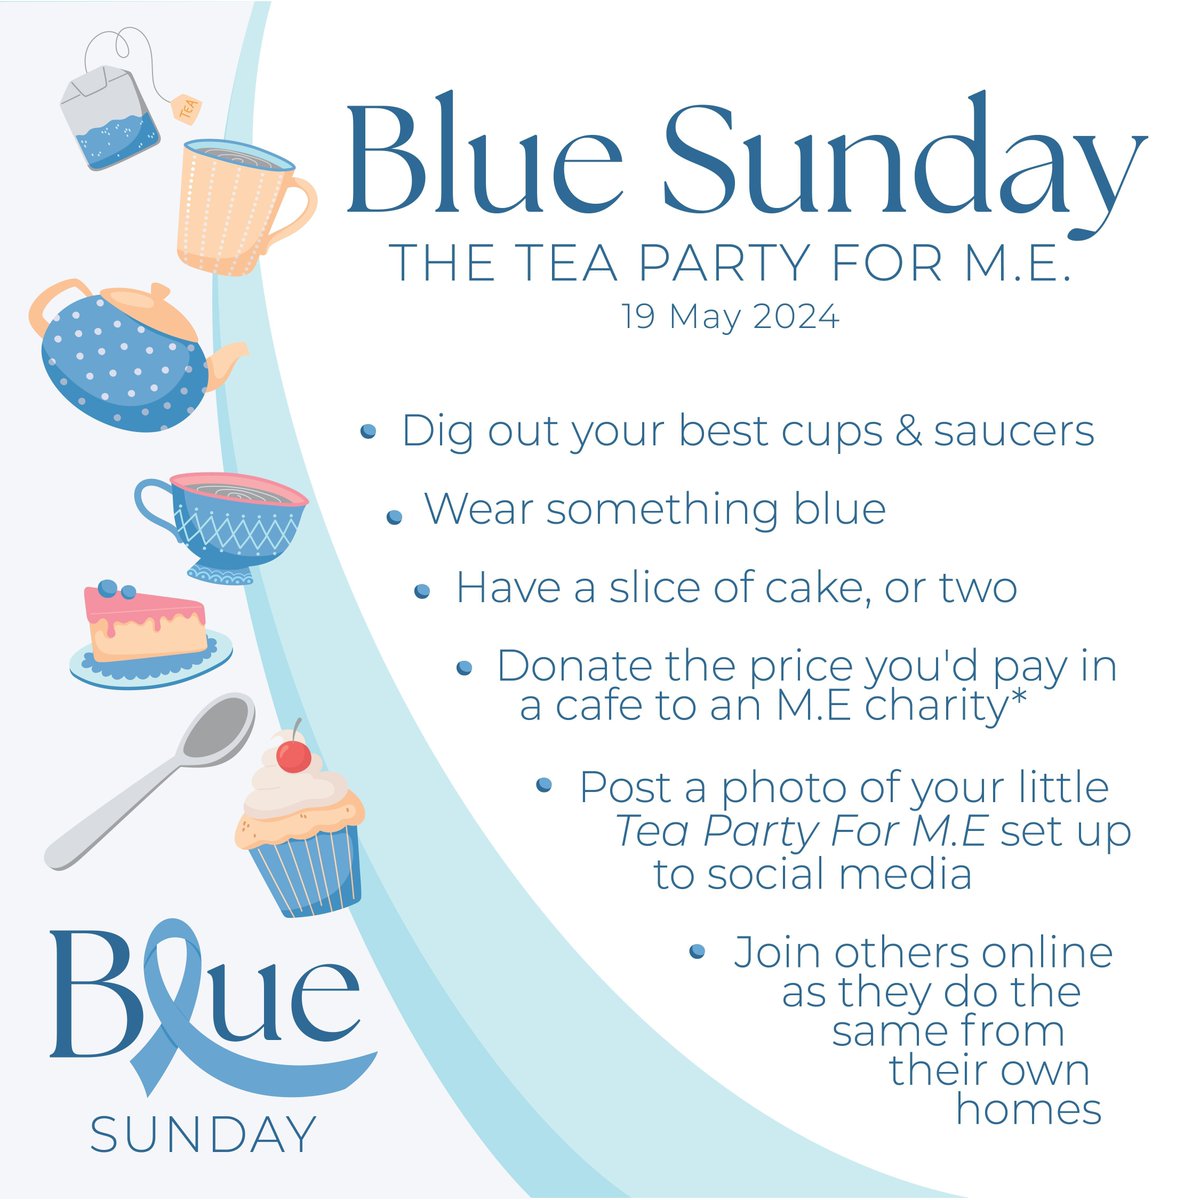 Next Sunday, 19th May, is Blue Sunday The Tea Party For ME 🫖🩵 Blue Sunday is a day for the ME community and their allies to come together whilst fundraising for ME charities. Join in online #BlueSunday2024 #TeaPartyForME2024 Donate to SmileForME: justgiving.com/page/bluesunda…